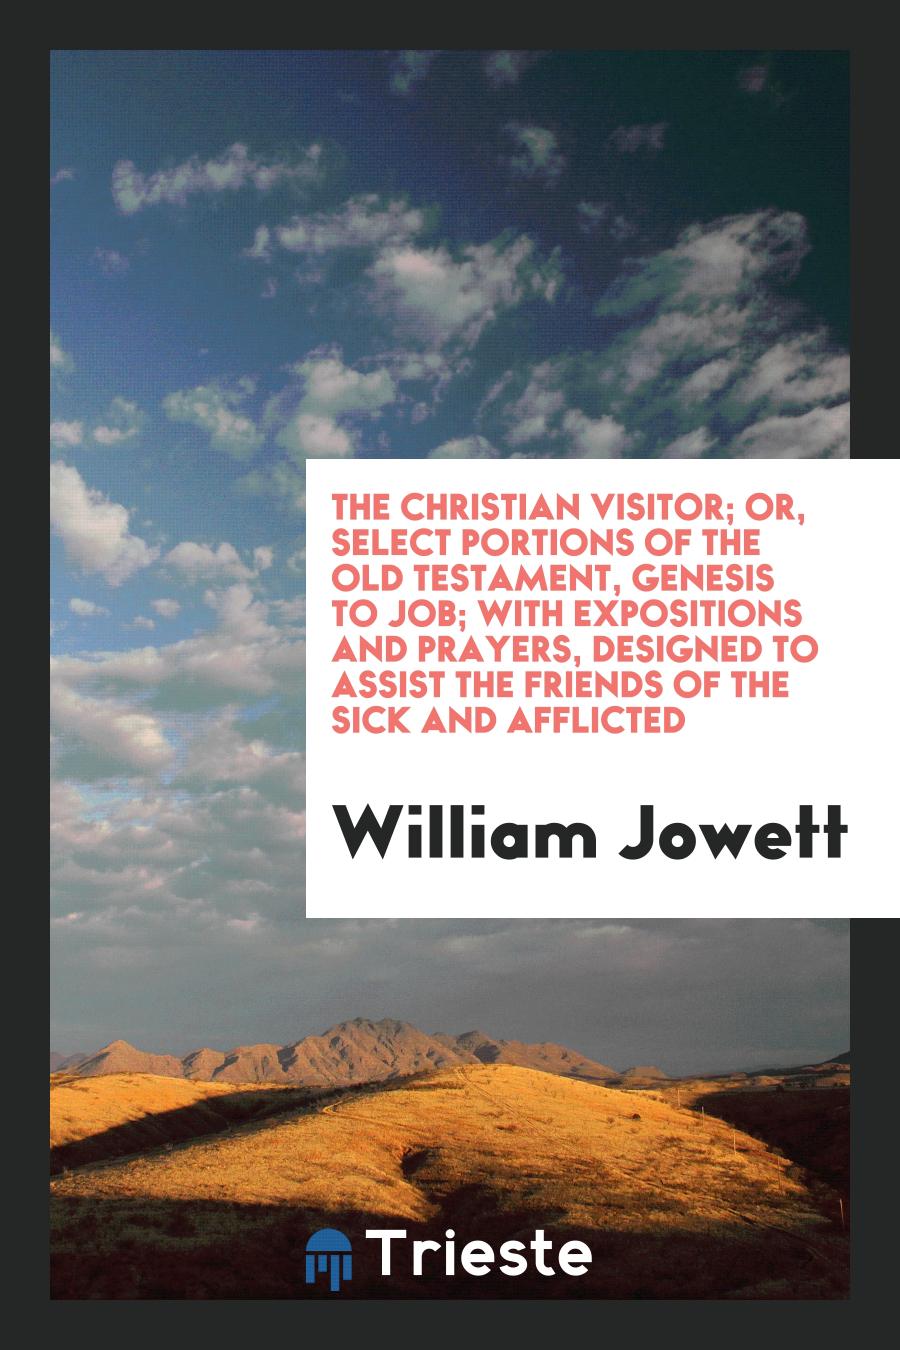 The Christian visitor; or, Select portions of the Old Testament, Genesis to Job; with expositions and prayers, designed to assist the friends of the sick and afflicted